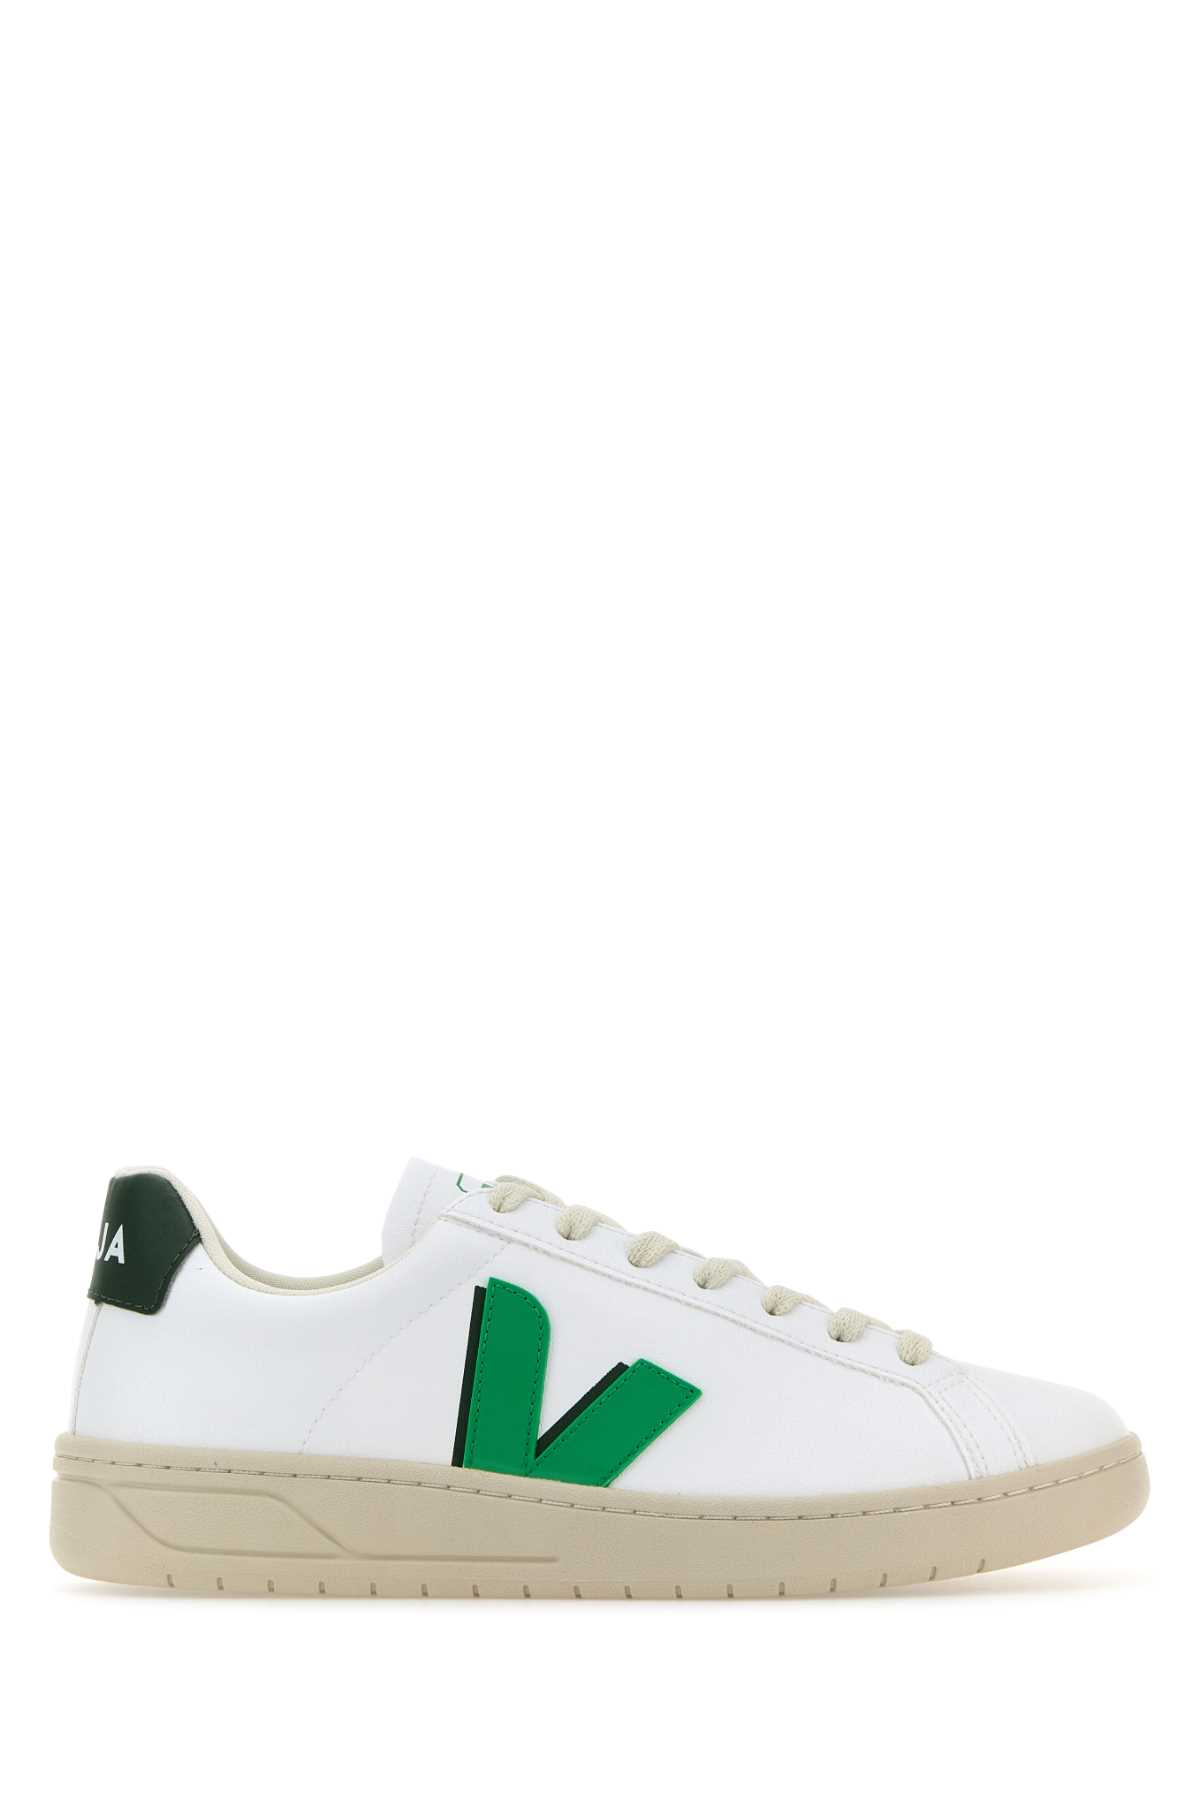 White Synthetic Leather Urca Sneakers